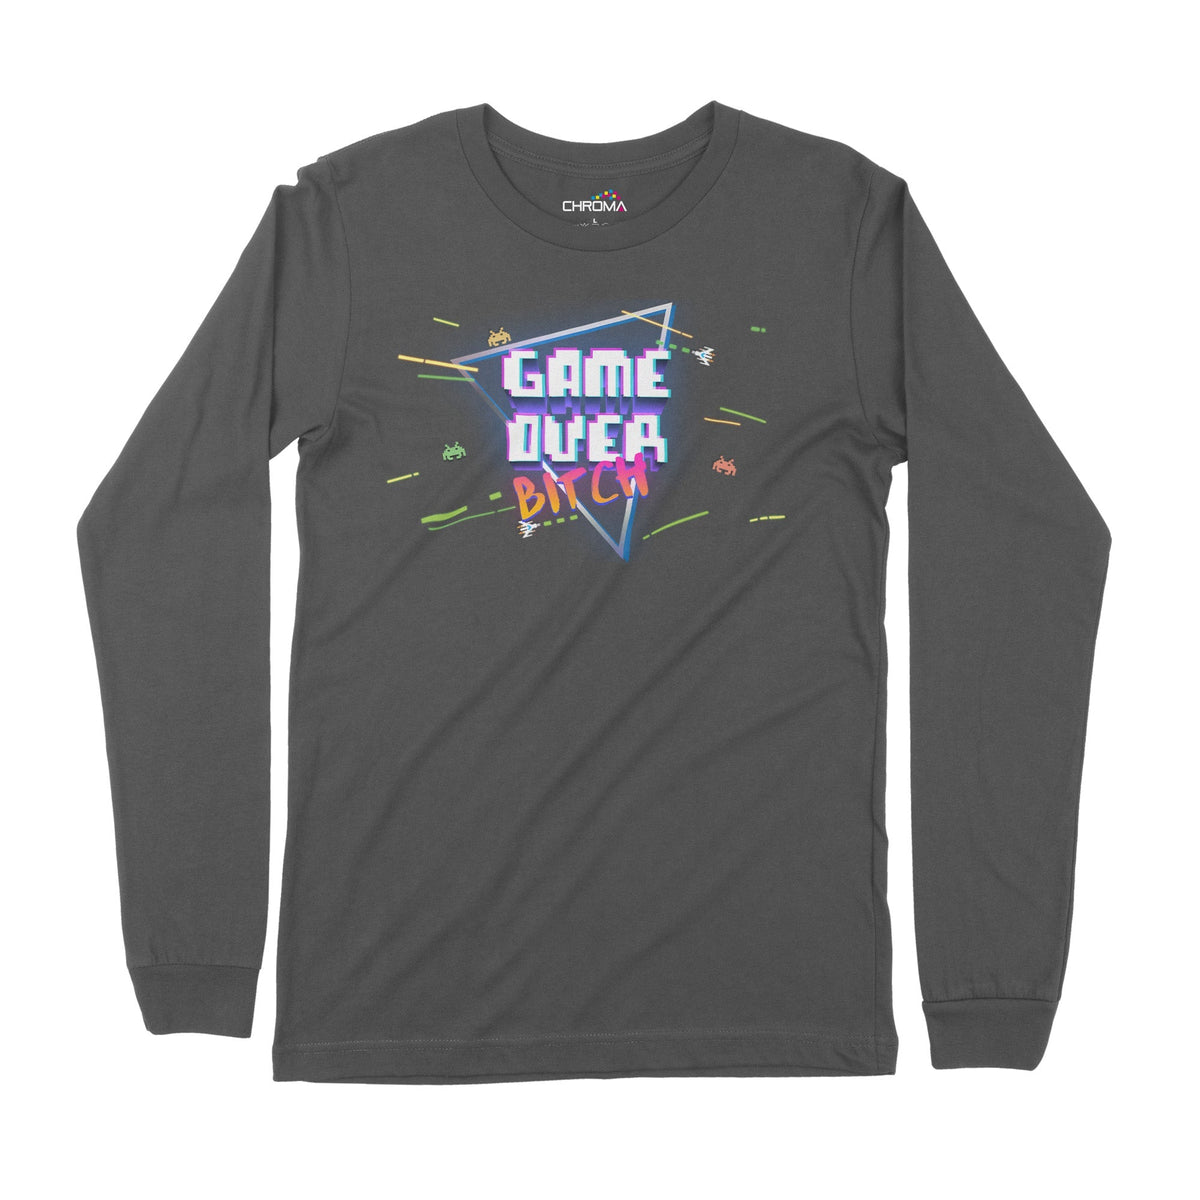 Game Over Bitch | Long-Sleeve T-Shirt | Premium Quality Streetwear Chroma Clothing